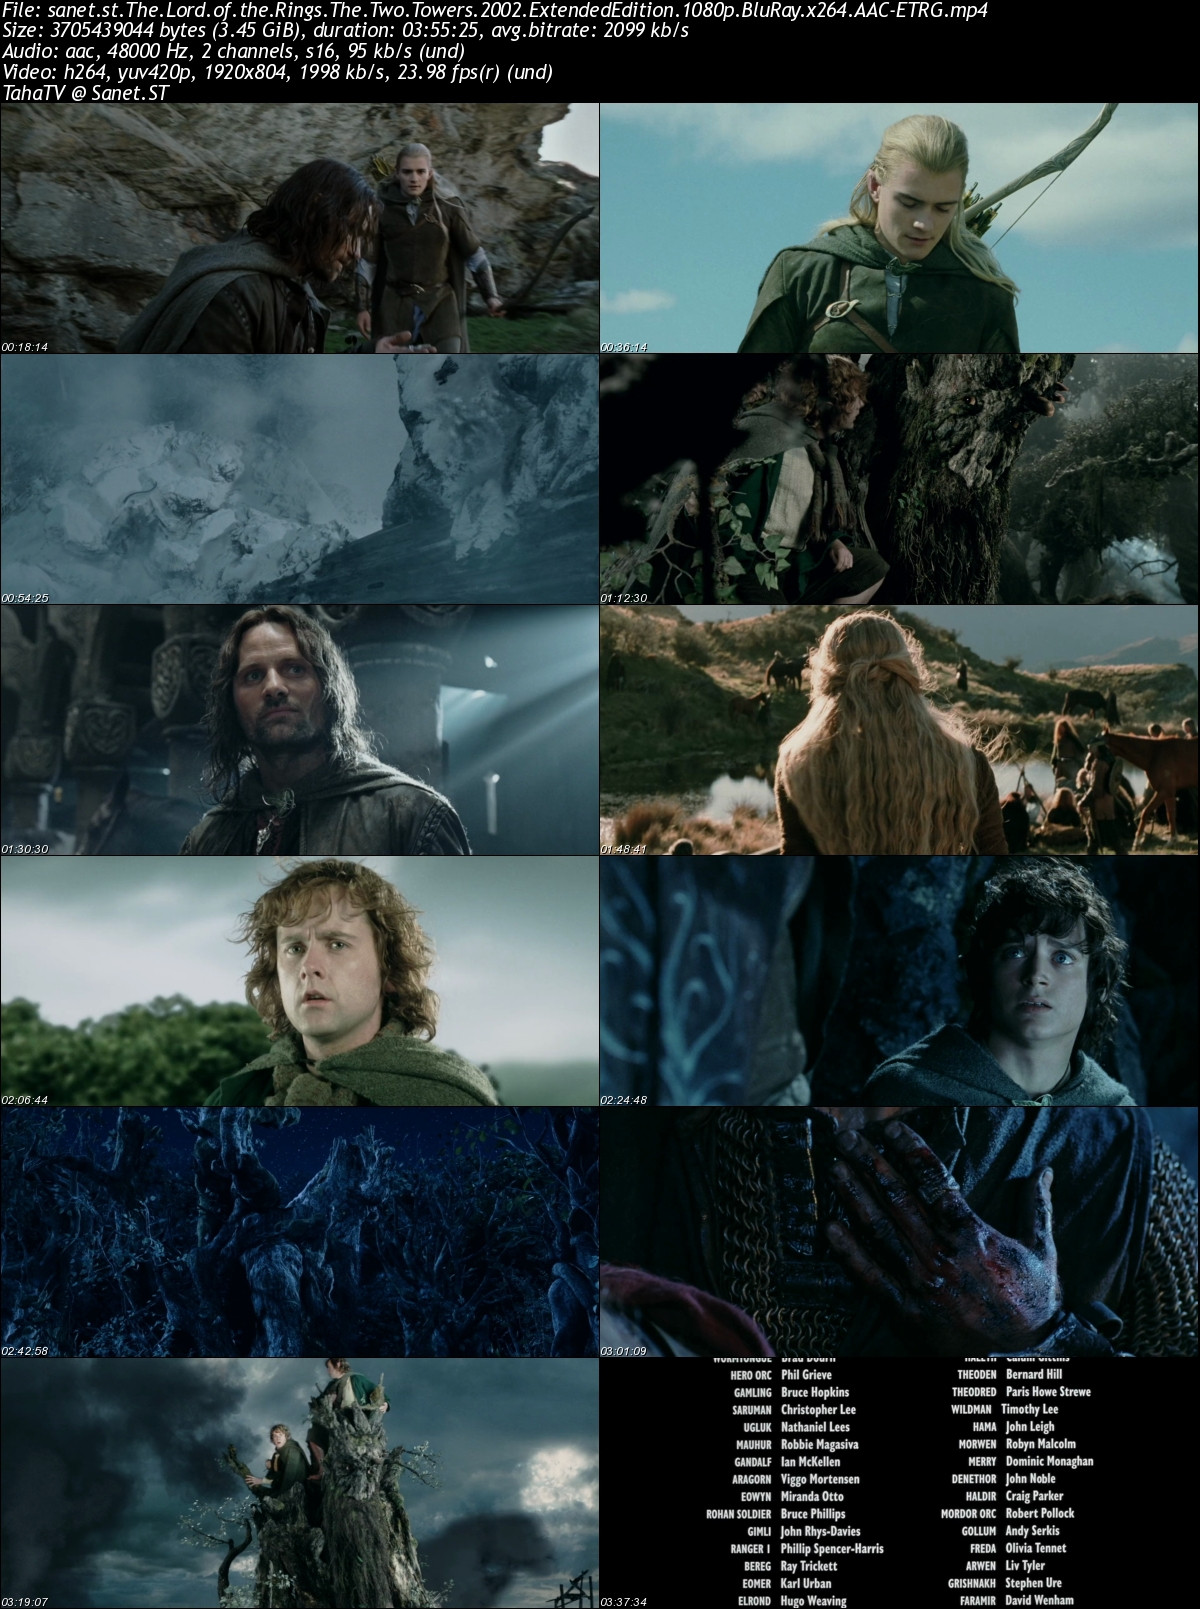 the lord of the rings trilogy extended edition 1080p download